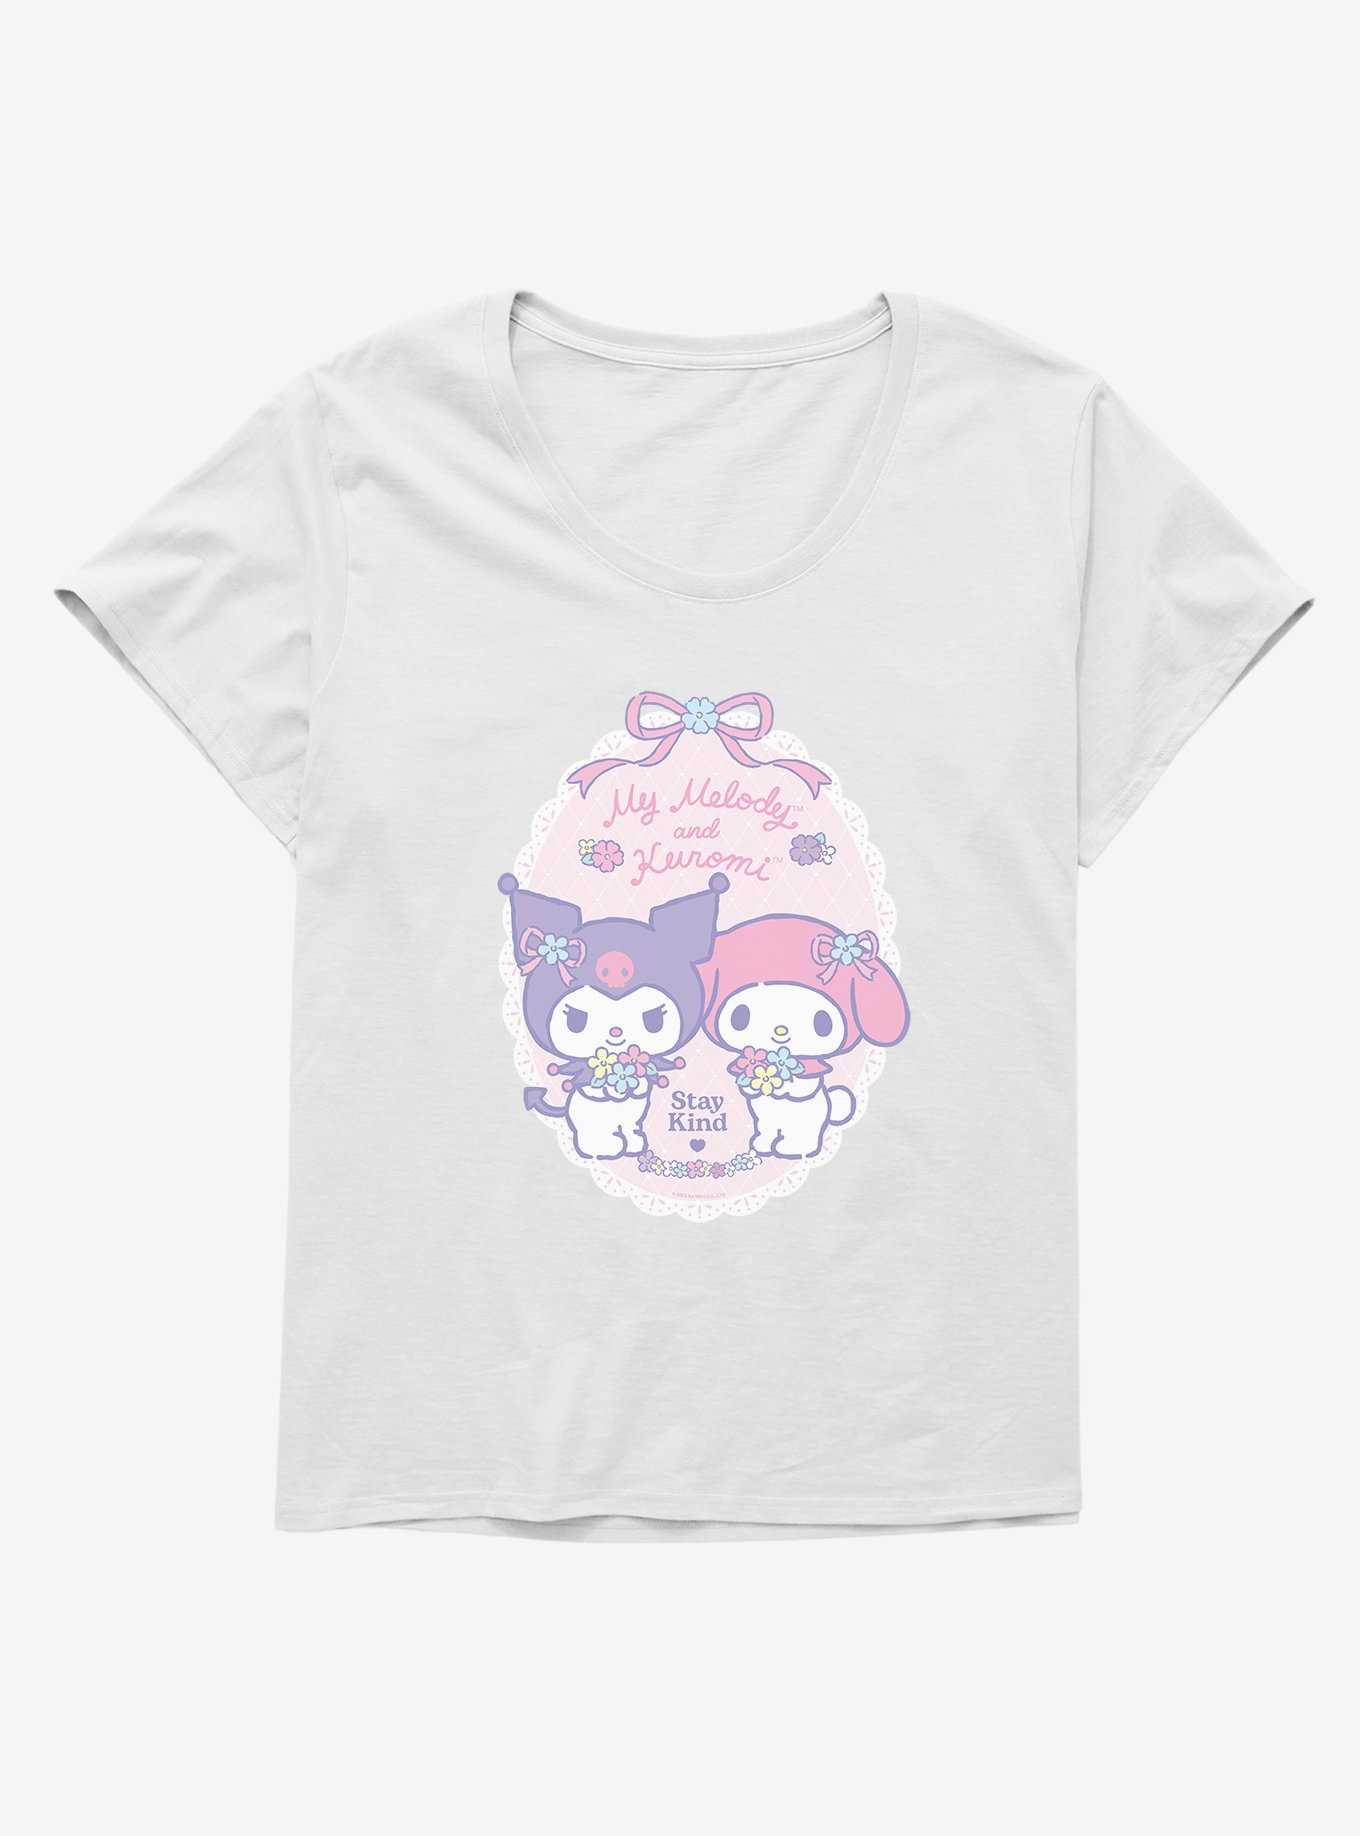 My Melody & Kuromi Pastel Flowers Stay Kind Girls T-Shirt Plus Size, , hi-res